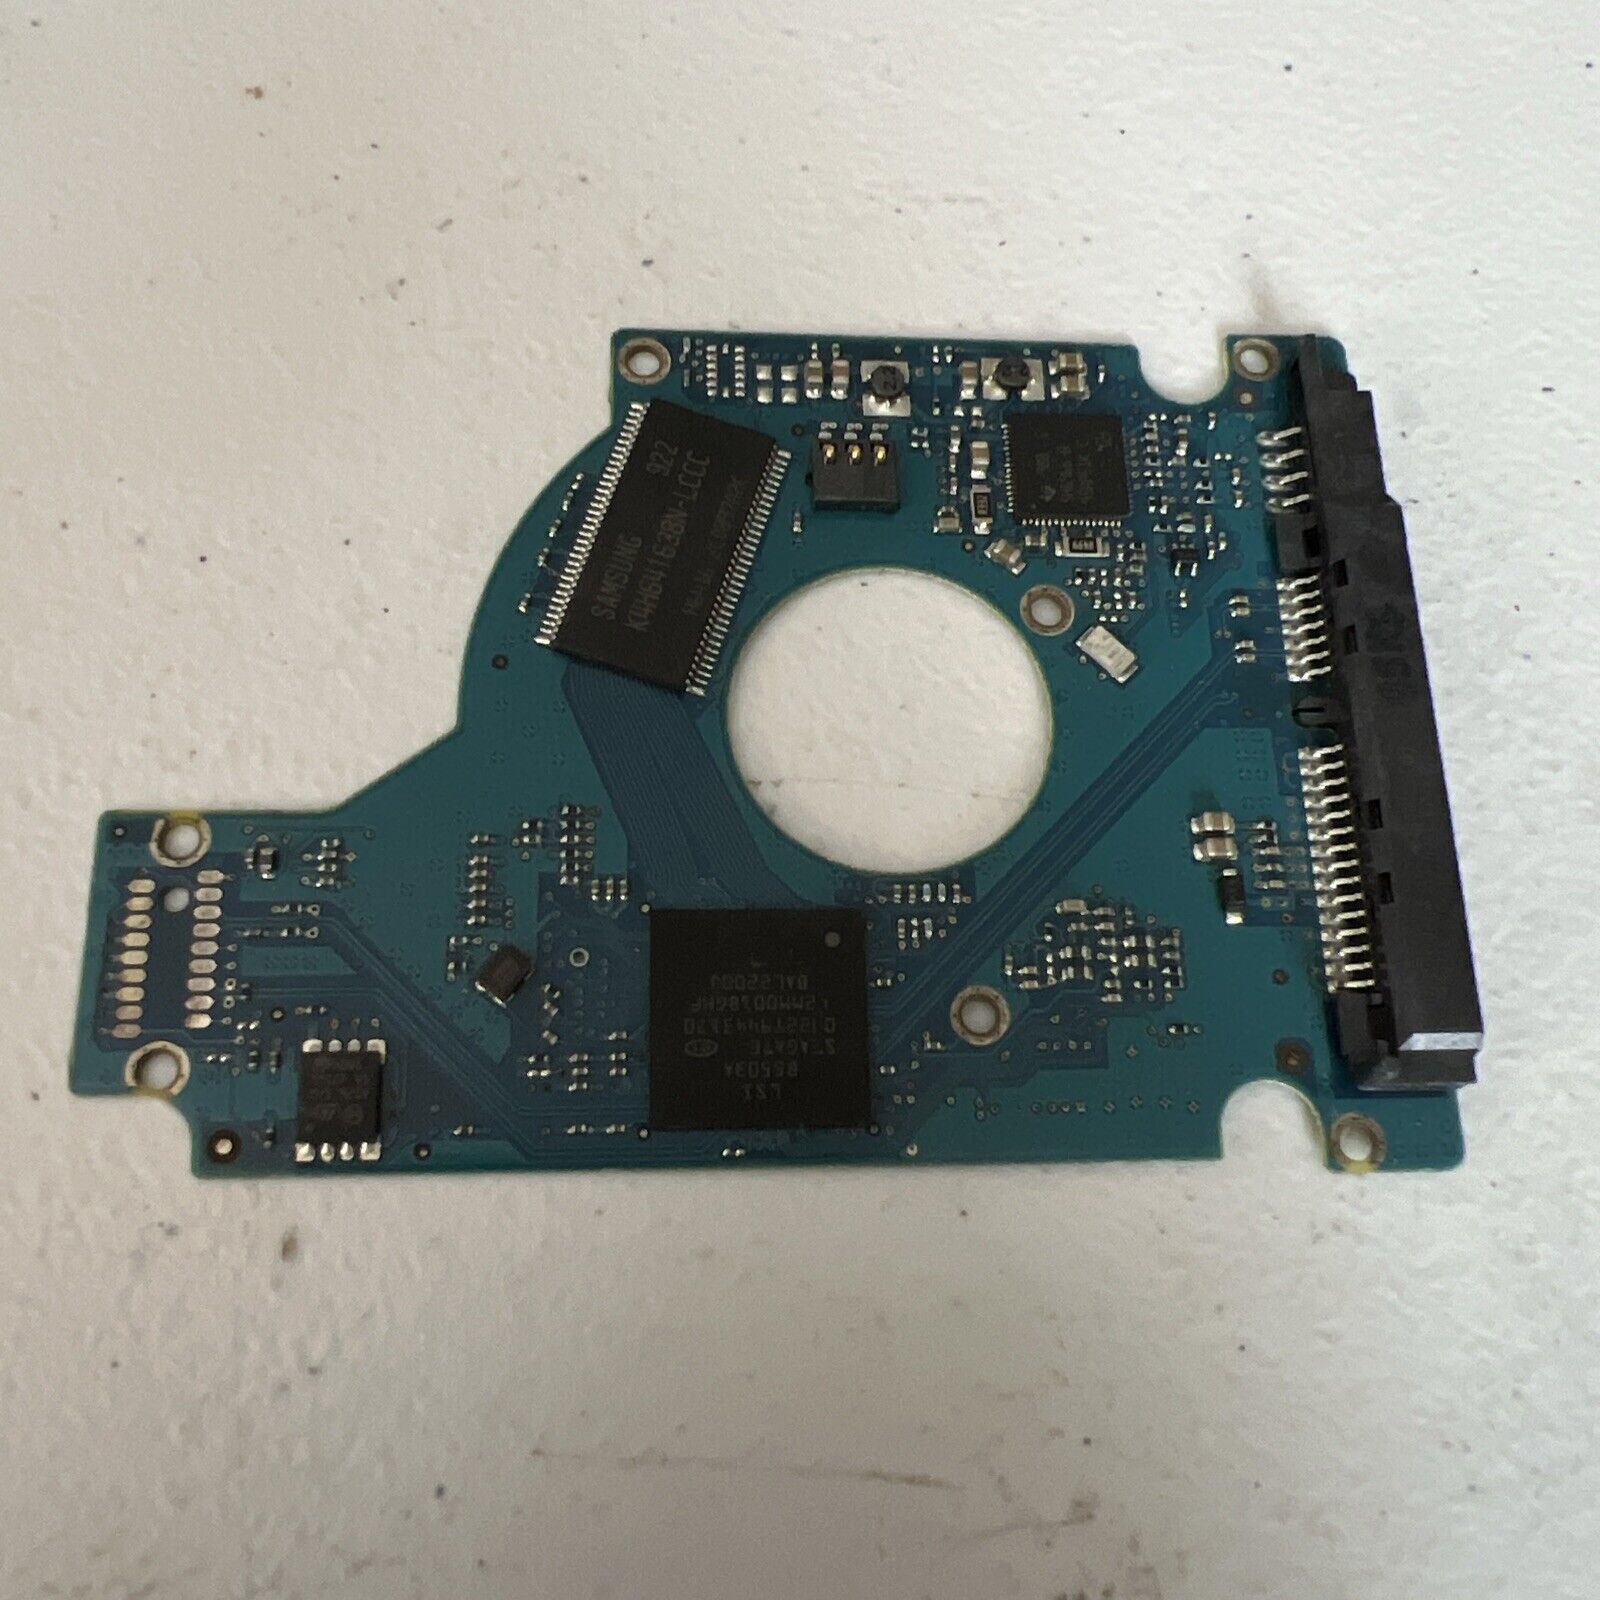 Hard Drive Donor Board PCB Only Seagate Momentus ST9250315A5 100536284